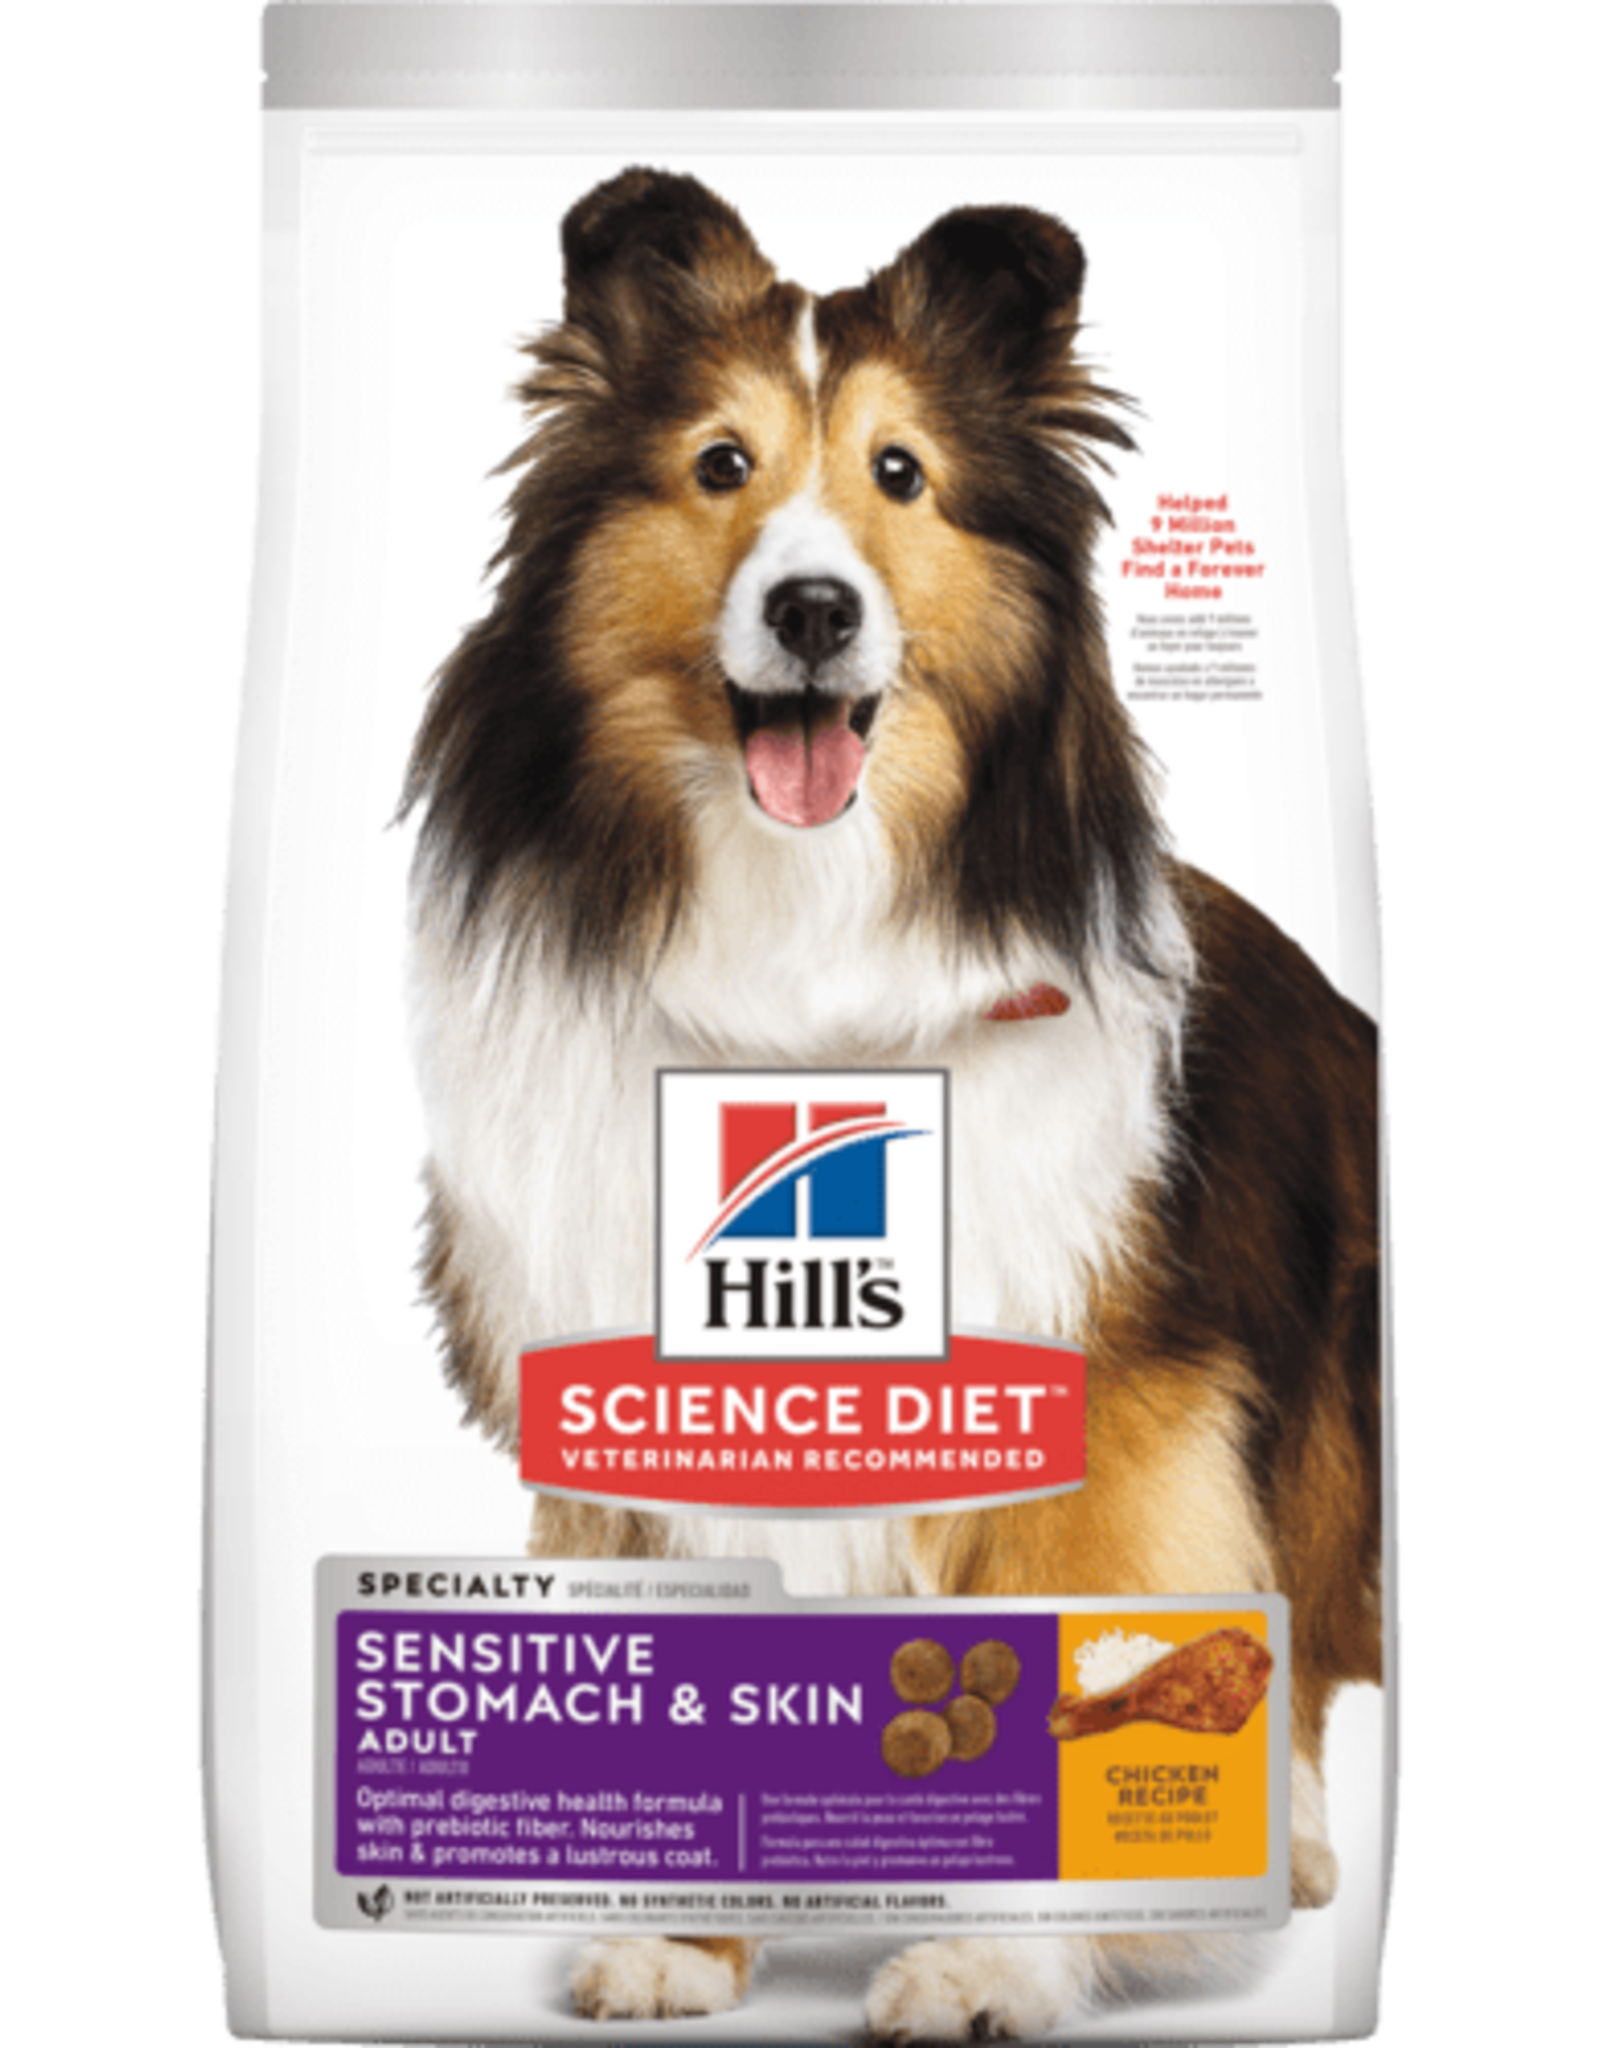 SCIENCE DIET HILL'S SCIENCE DIET CANINE SENSITIVE STOMACH & SKIN 30LBS